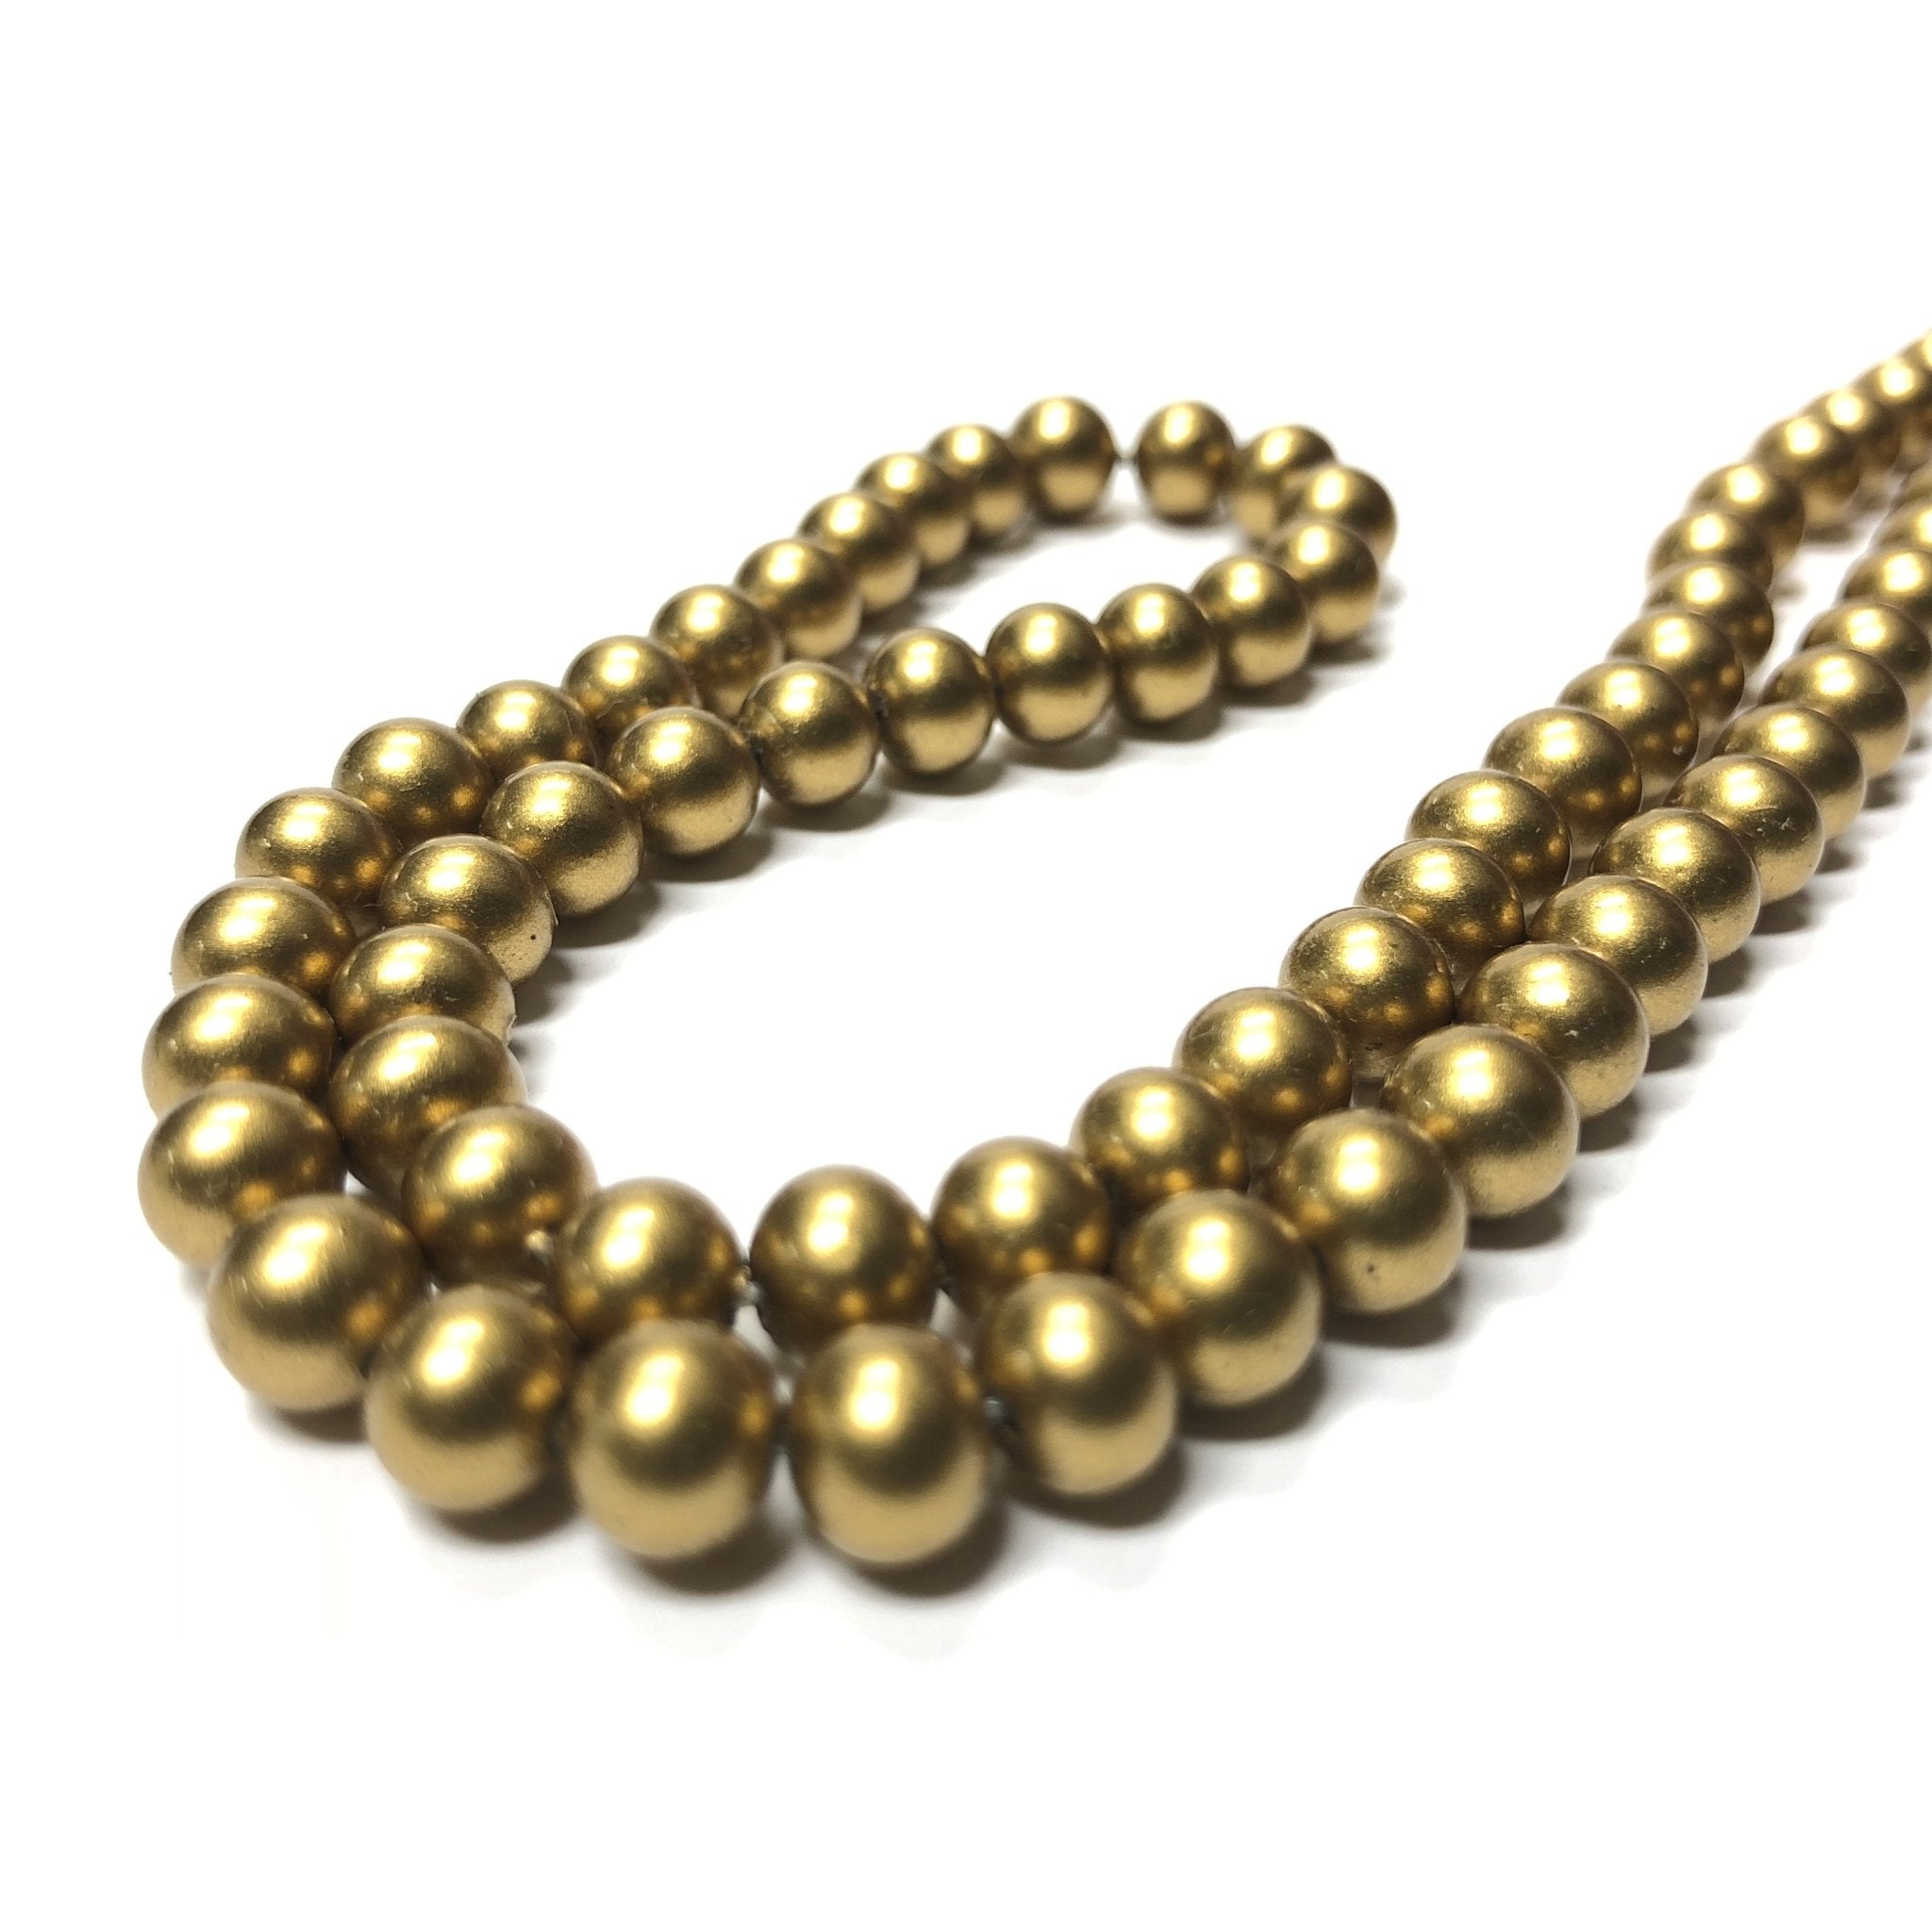 6mm Ridged Golden Ball Pearl Necklace Clasp